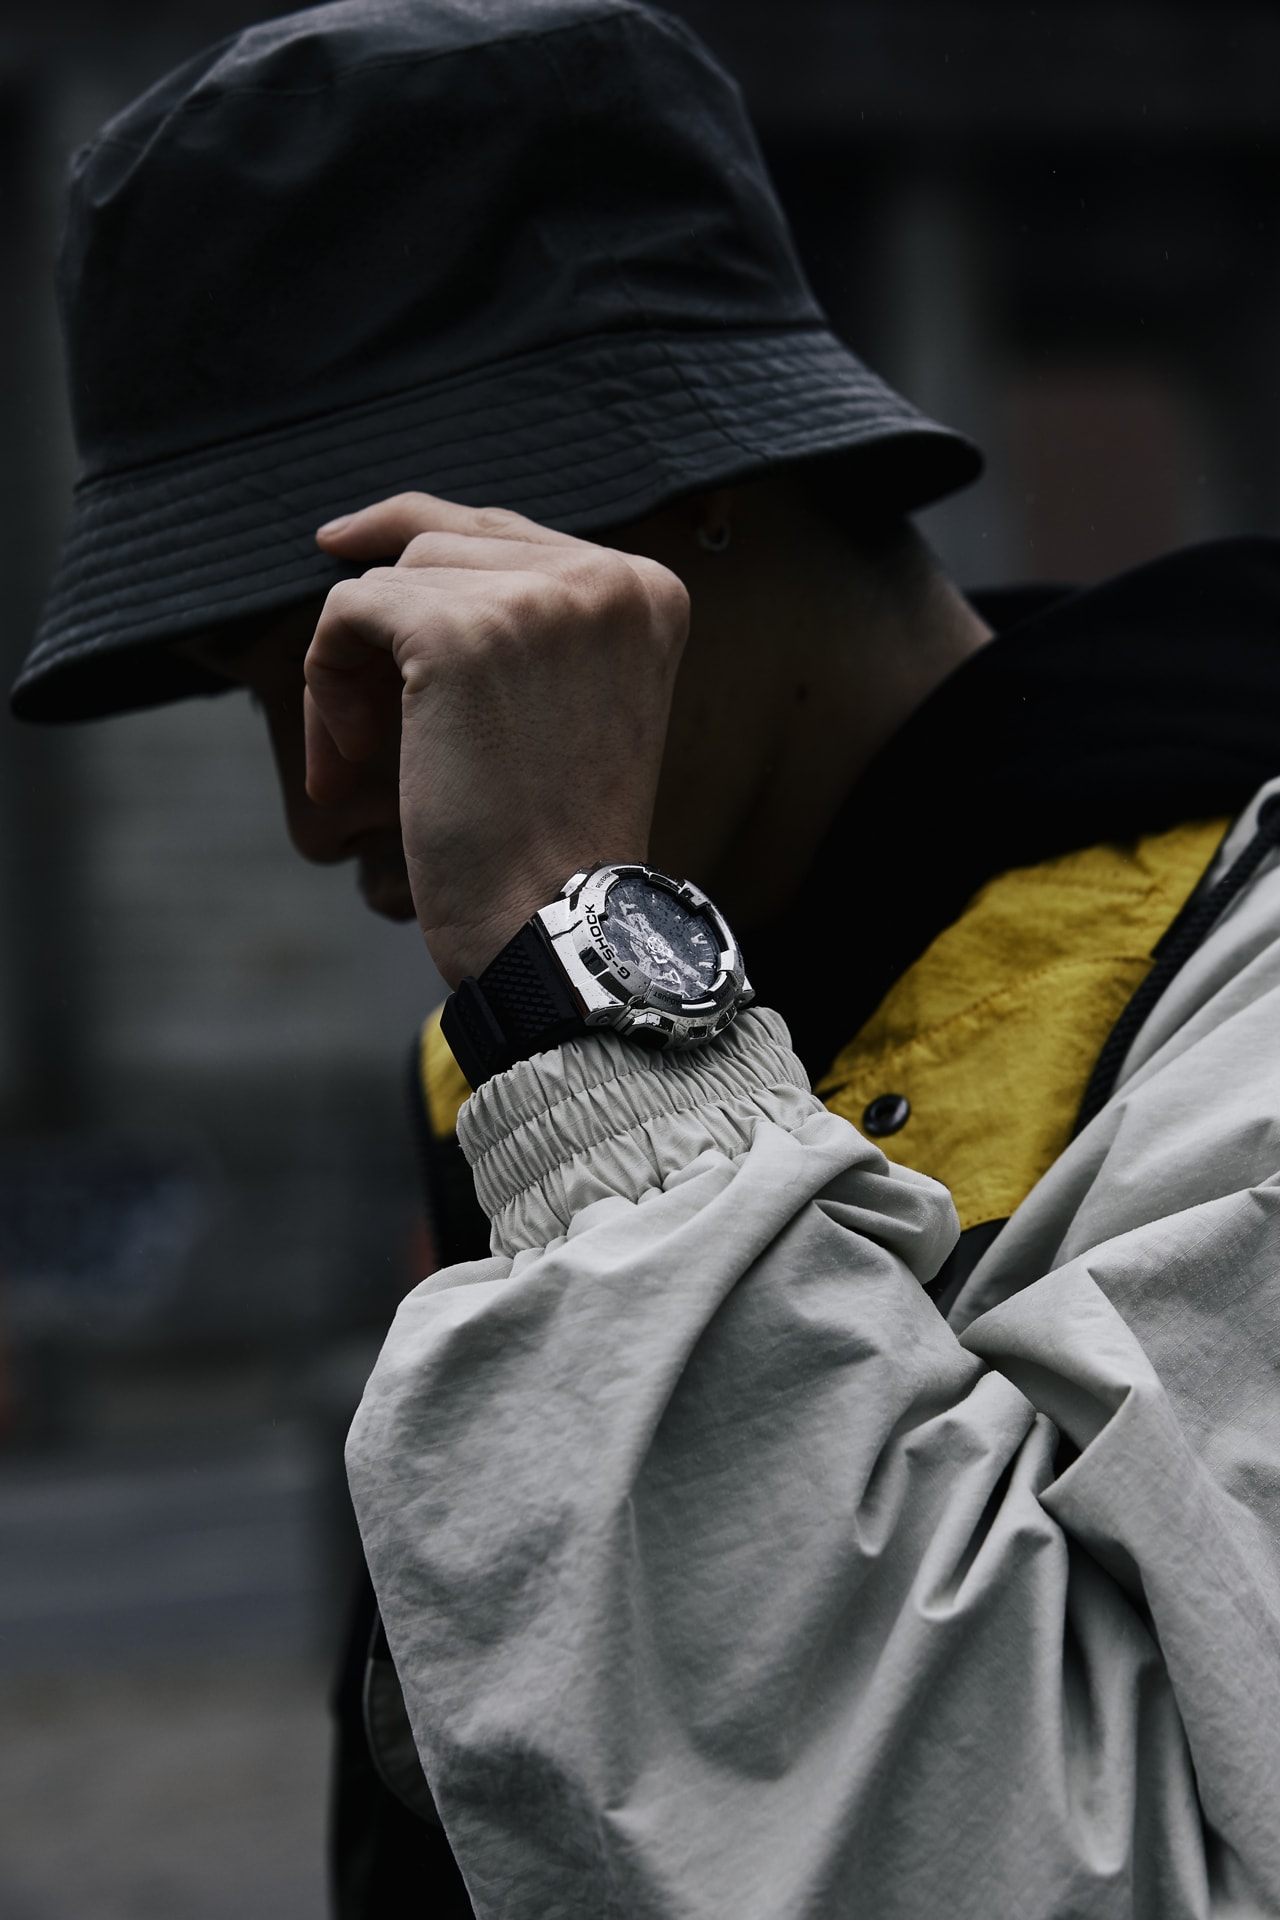 G-SHOCK's New GM110 Series Timepiece Release | Hypebeast